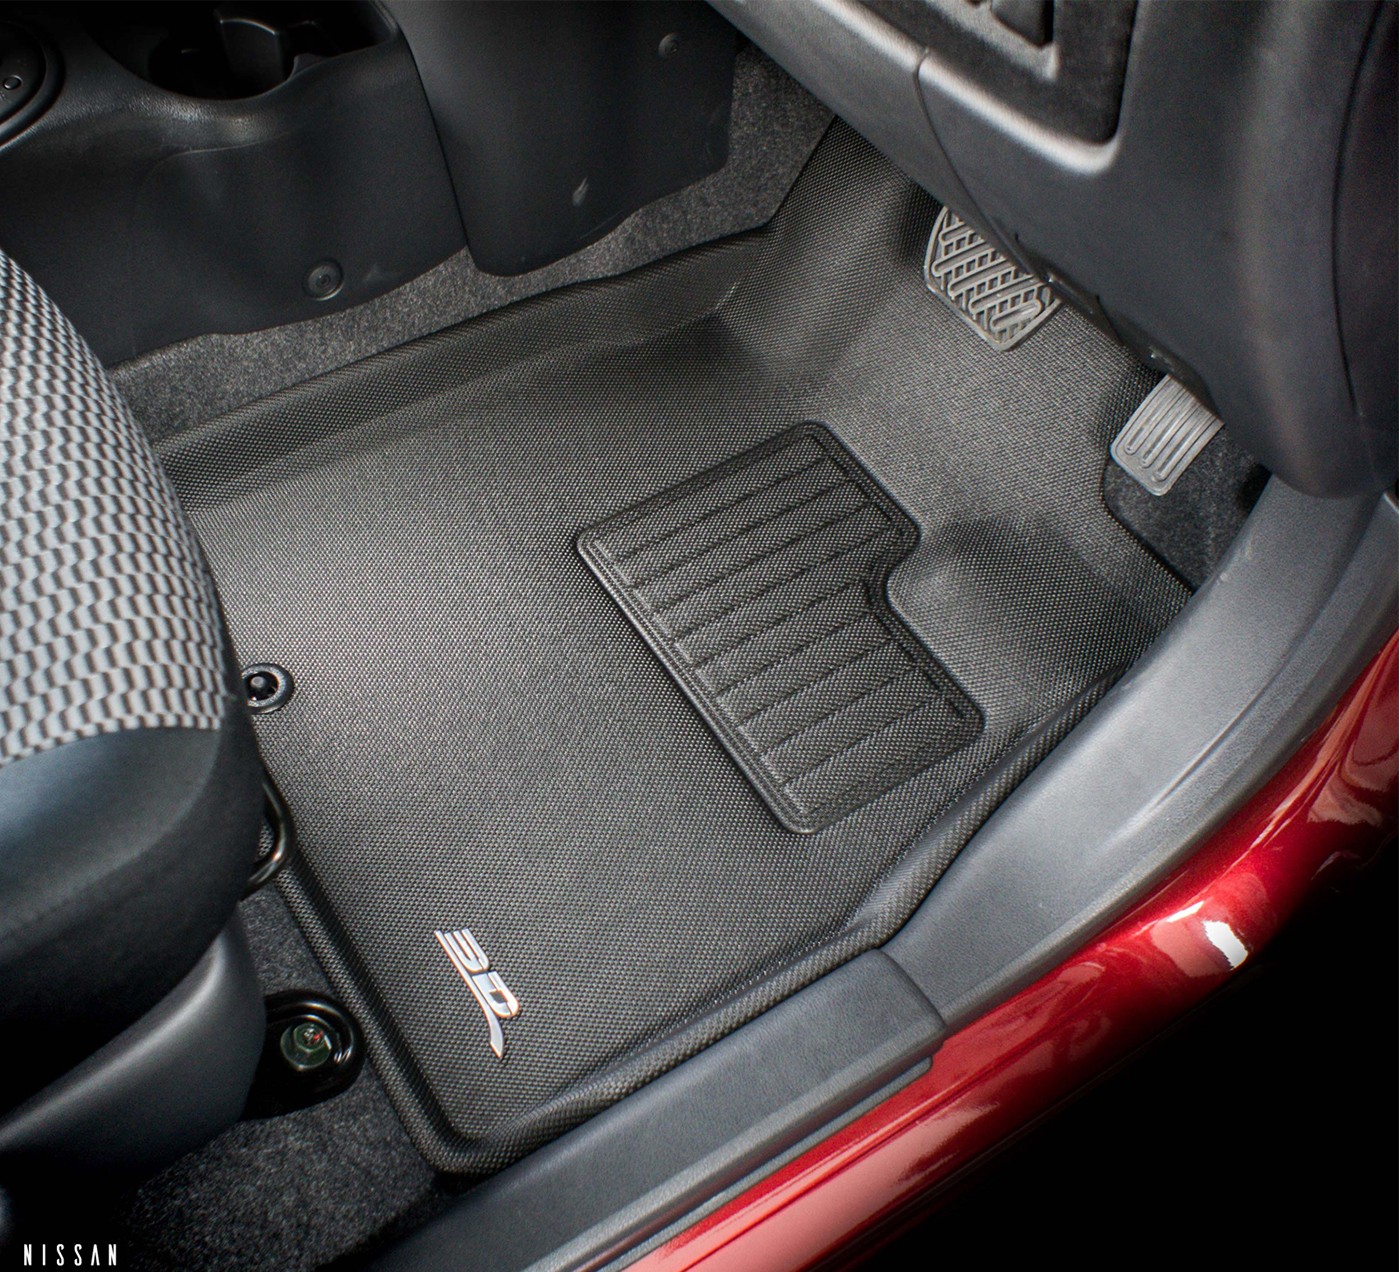 Garage Floor Mats For Cars: High-Quality Protection, car mats